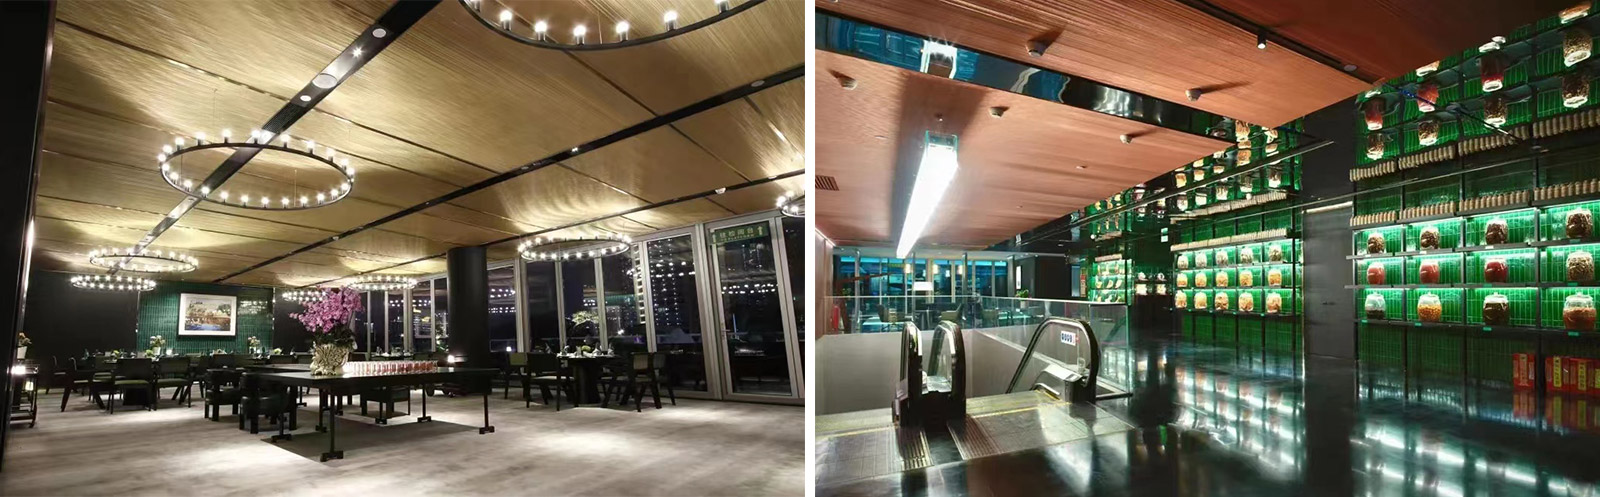 Proper woven metal interior was embellished for ceiling of CBD ·ONE restaurant.